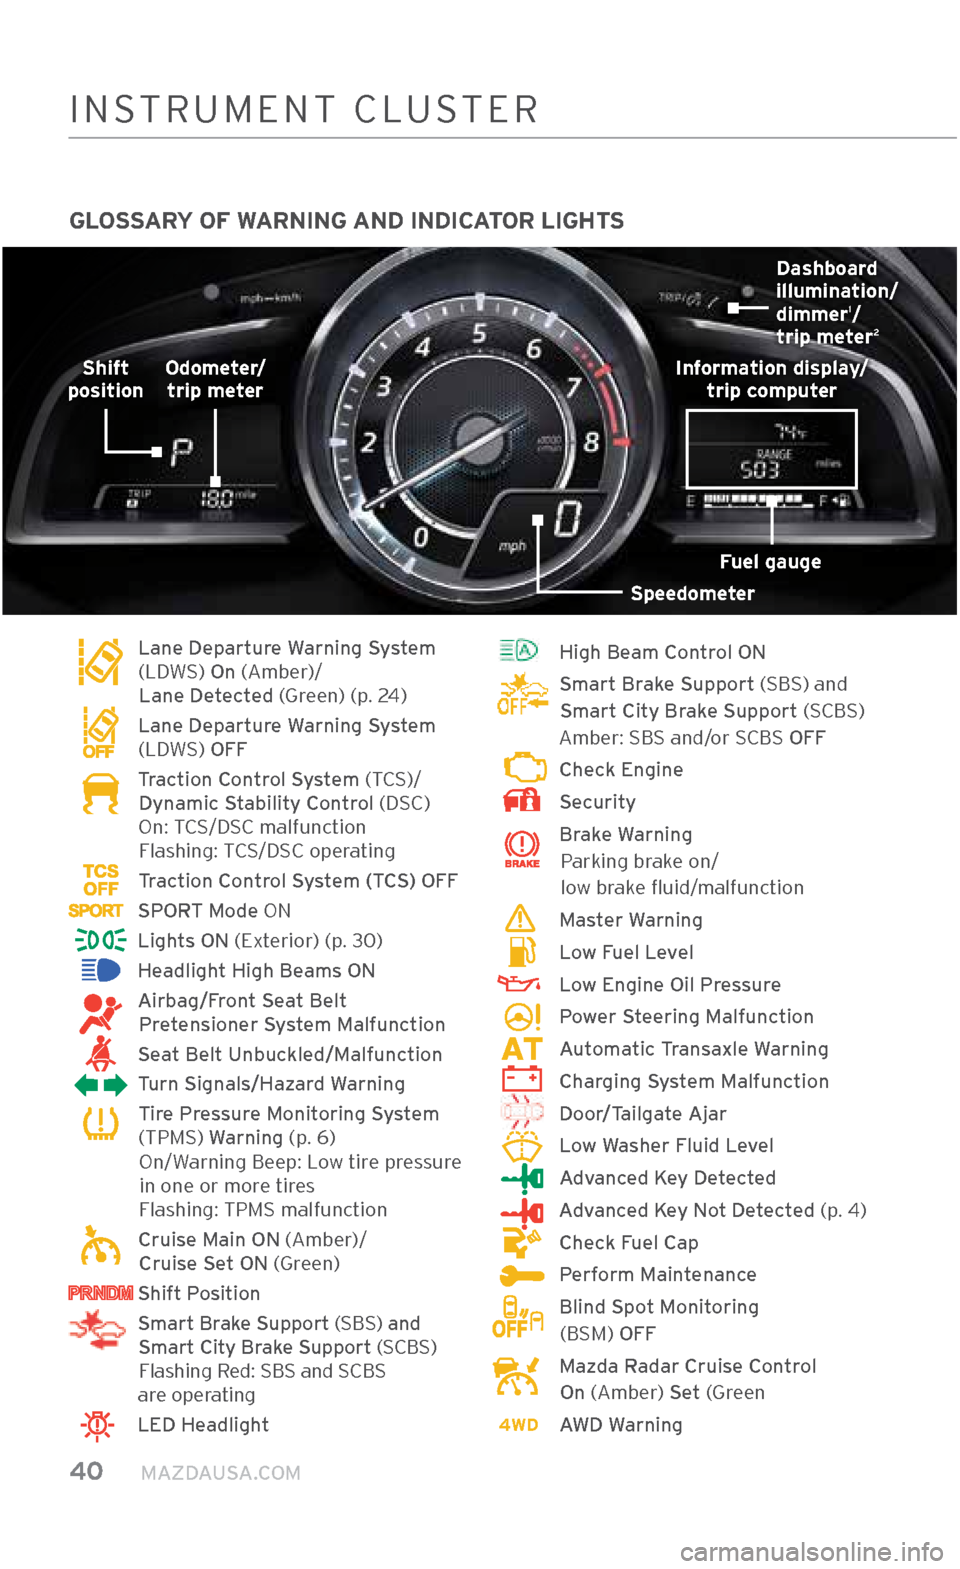 MAZDA MODEL CX-3 2018  Smart Start Guide (in English) 40     MAZDAUSA.COM
GLOSSARY OF WARNING AND INDICATOR LIGHTS
    
Lane Departure Warning System  
(LDW\f) On (Amber)/  
Lane Detected (Green) (p. 24)
     
Lane Departure Warning System  
(LDW\f)  OFF